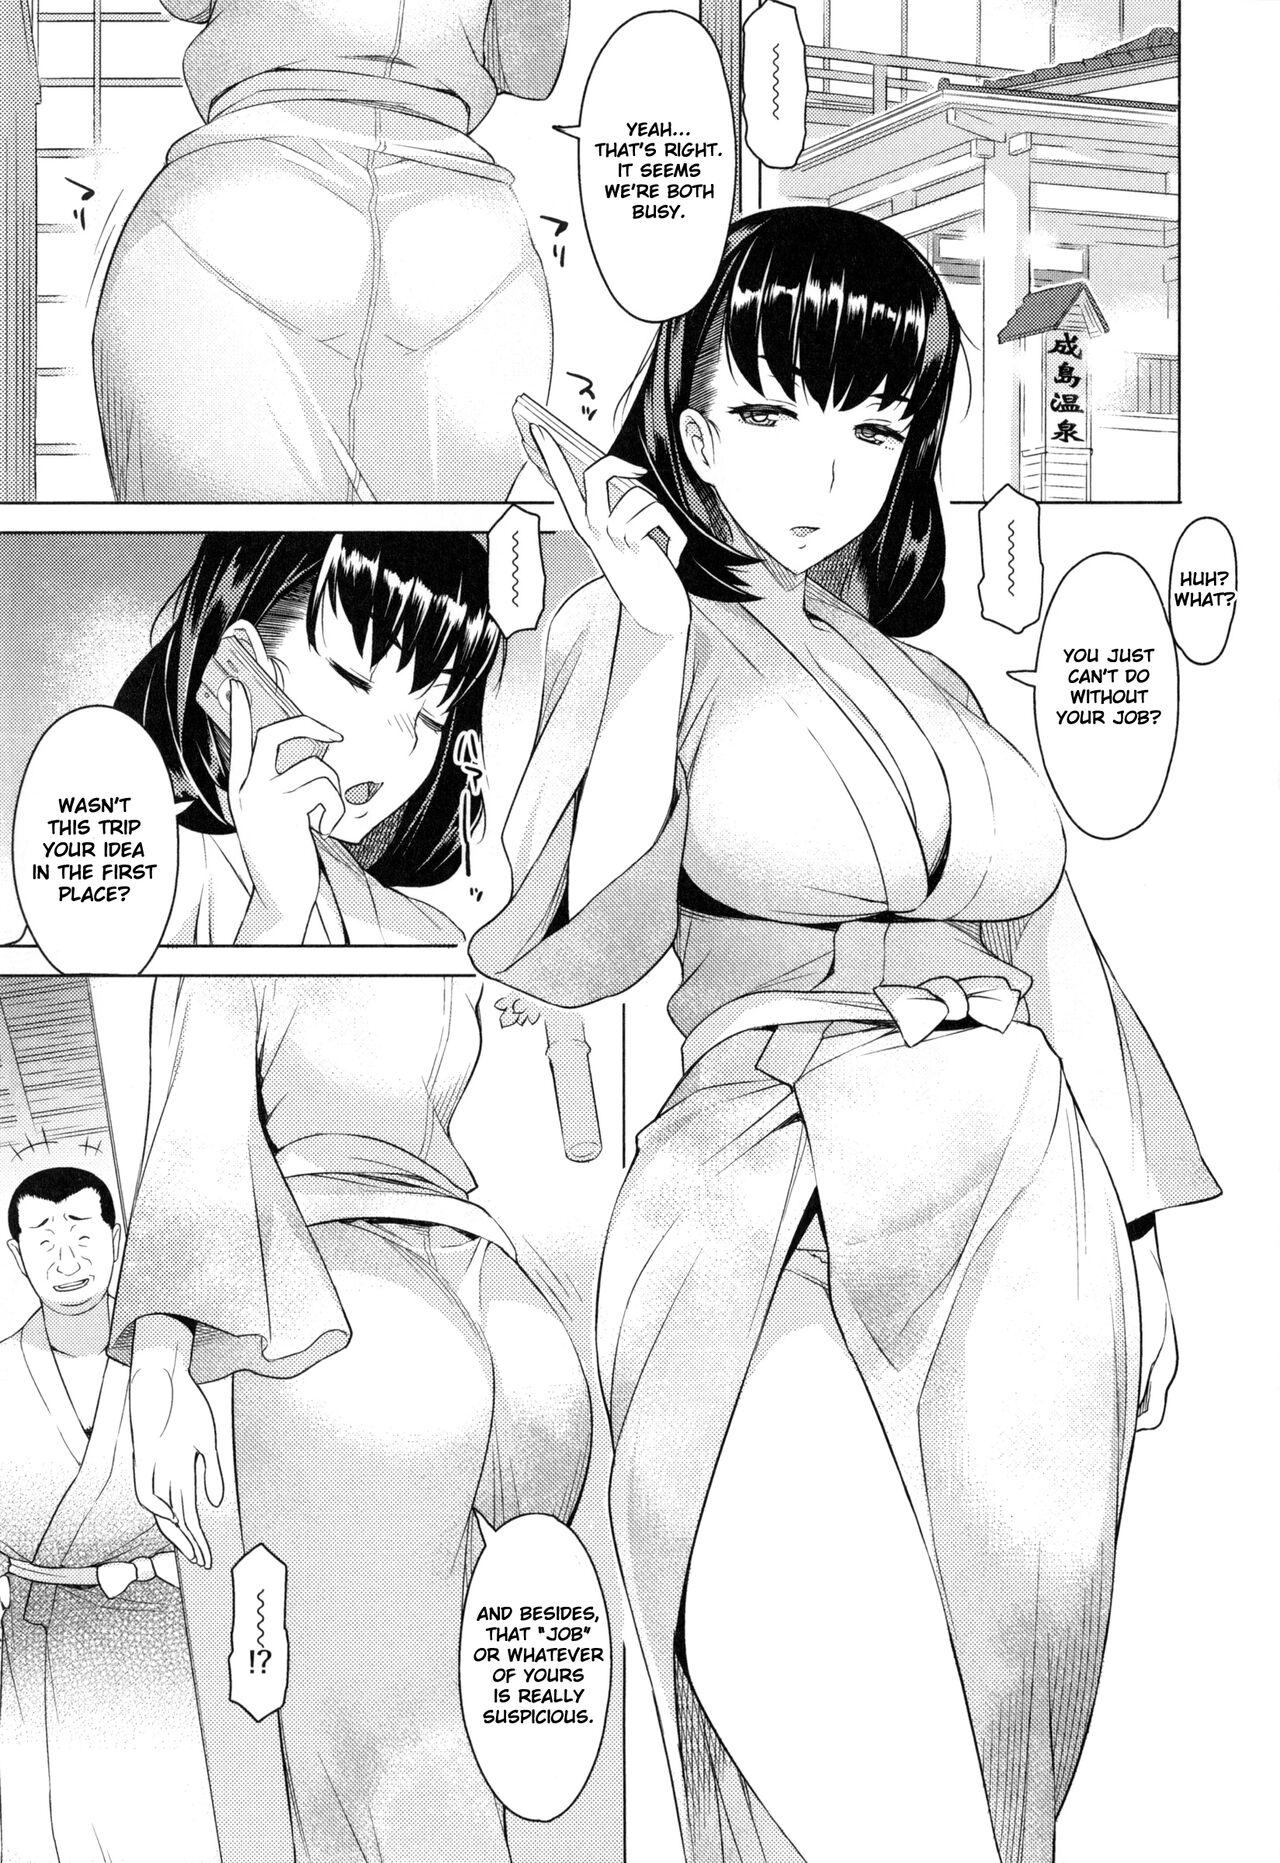 Bigtits Tsumaduki | With a Wife - Original Nylons - Page 1